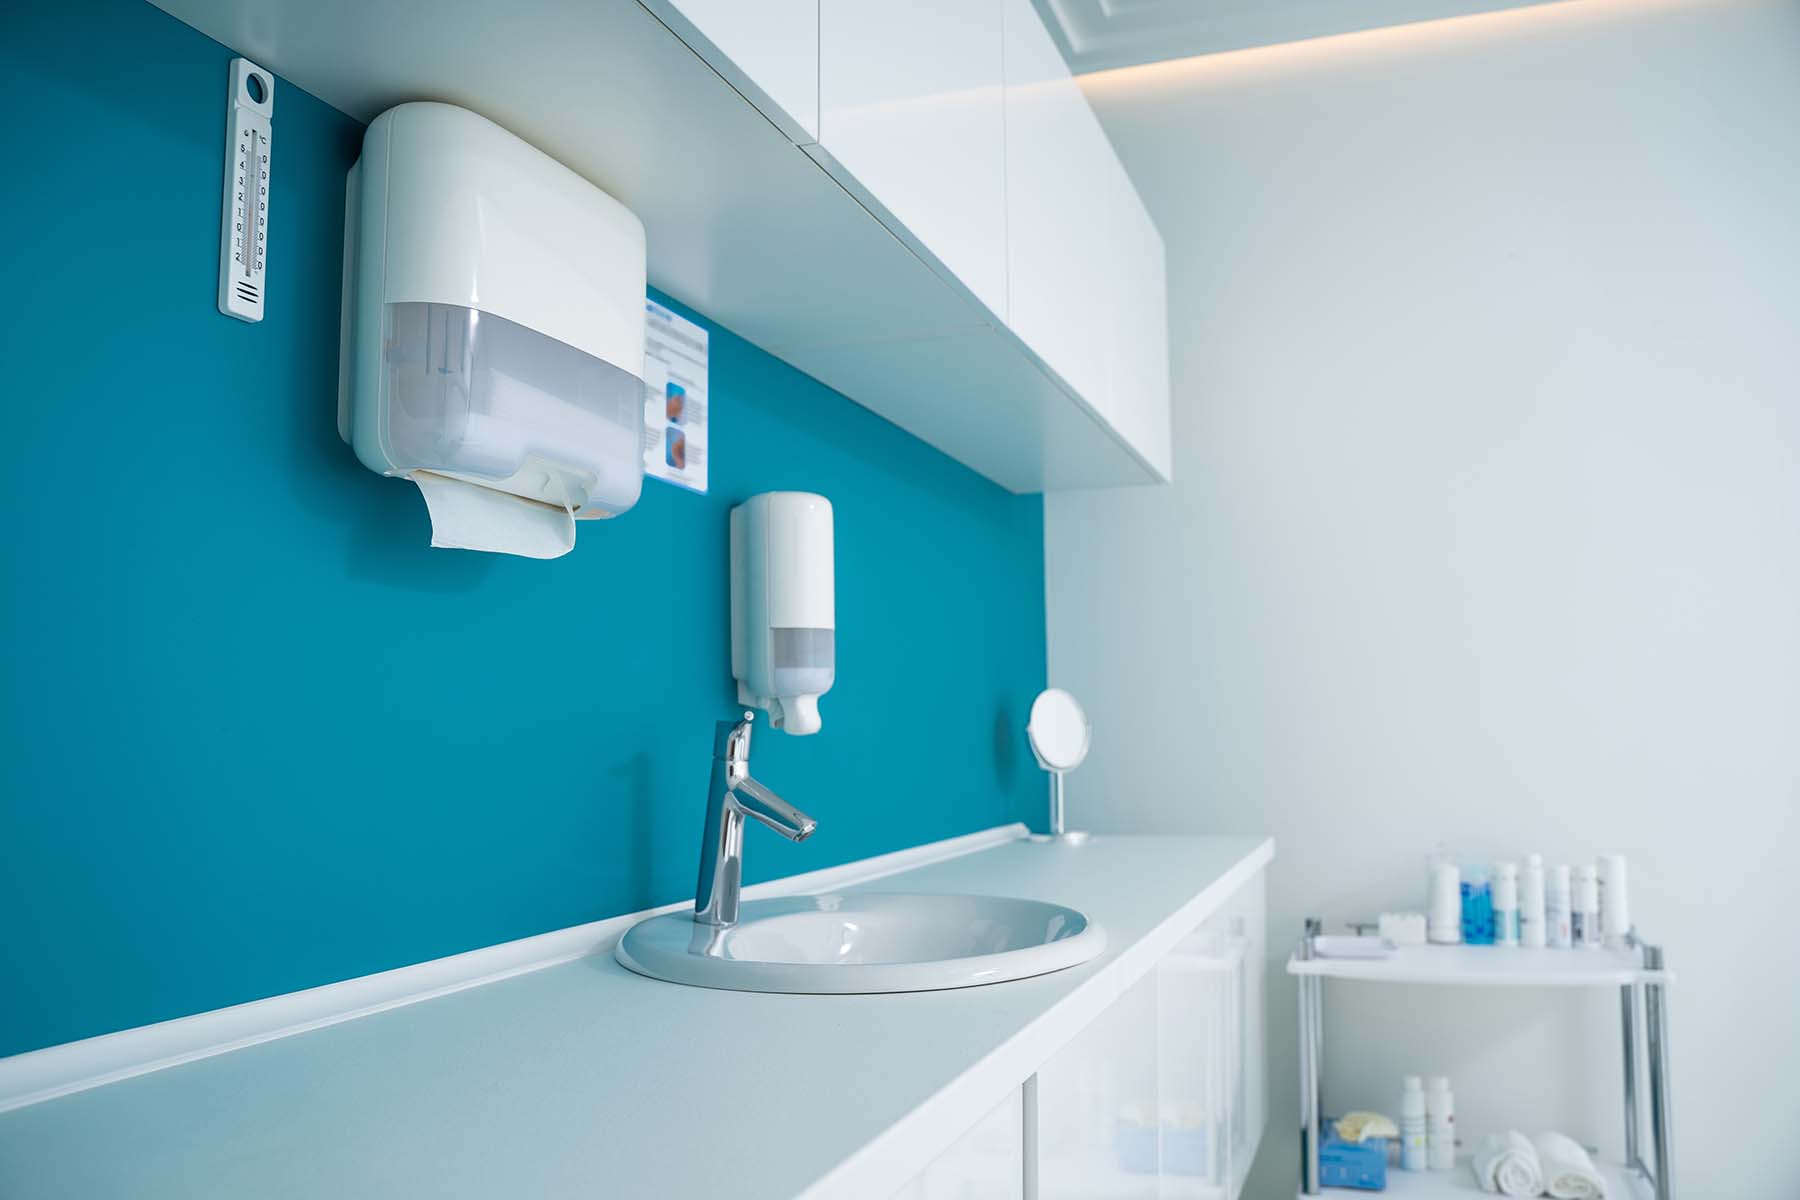 healthcare surfaces disinfection compatibility